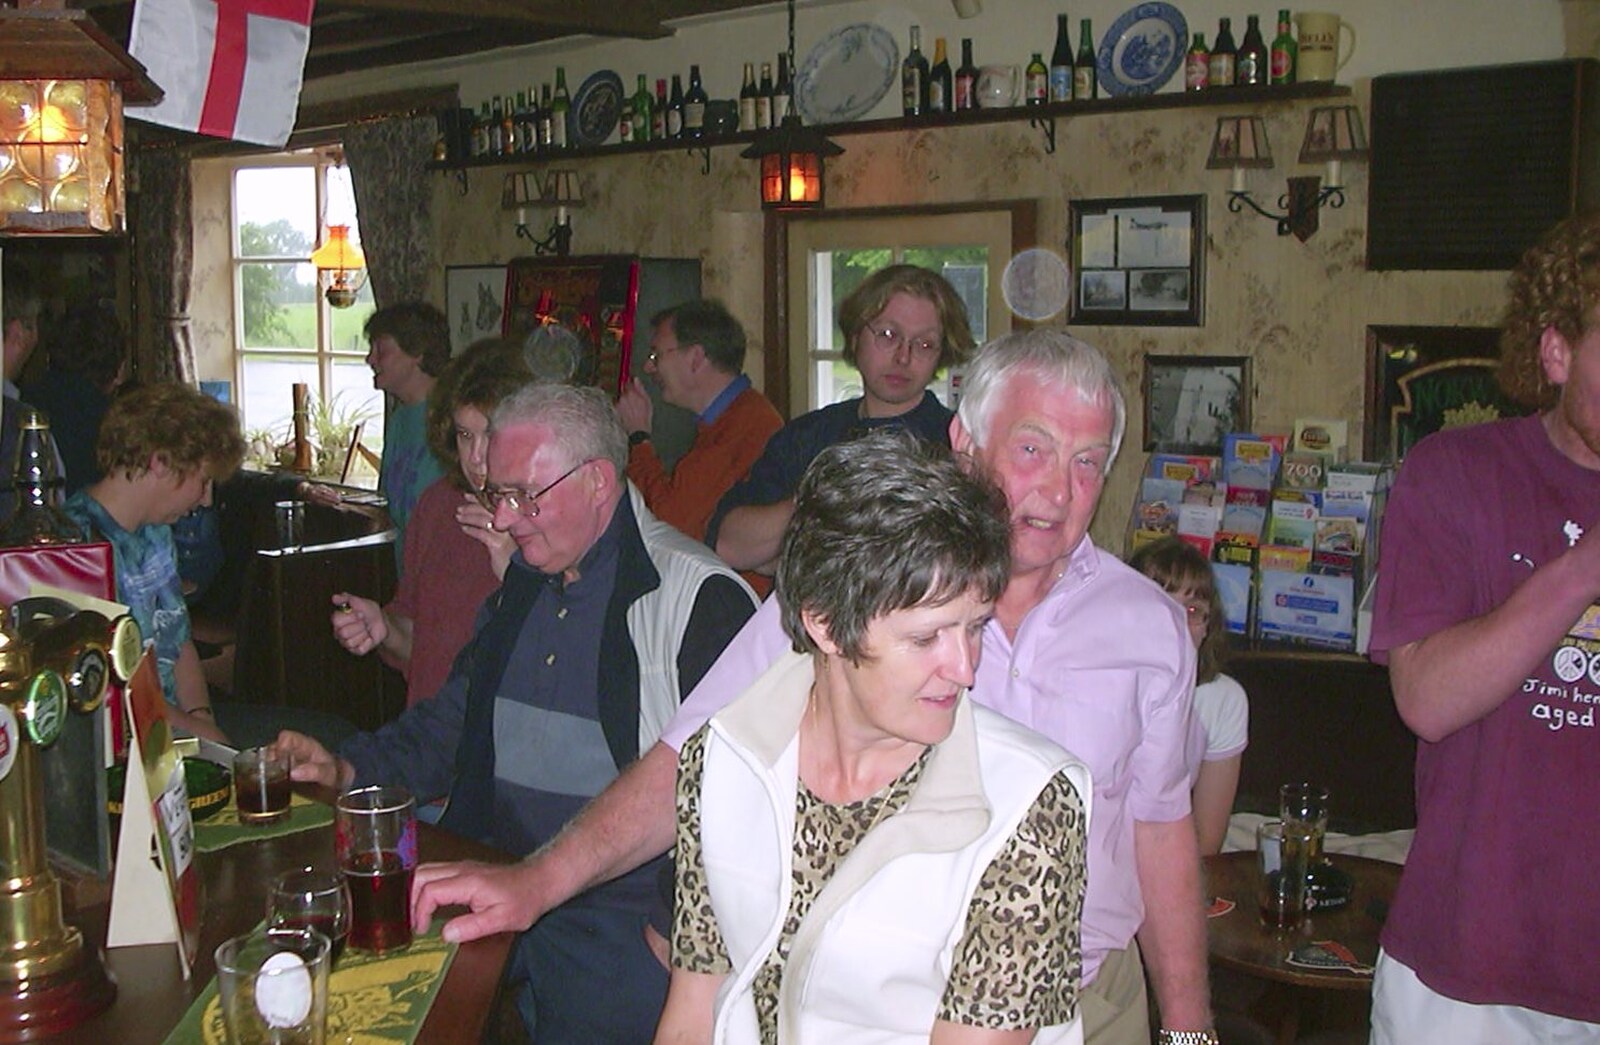 A Rainy Barbeque at the Swan Inn, Brome, Suffolk - 15th June 2002: The gang has all moved indoors